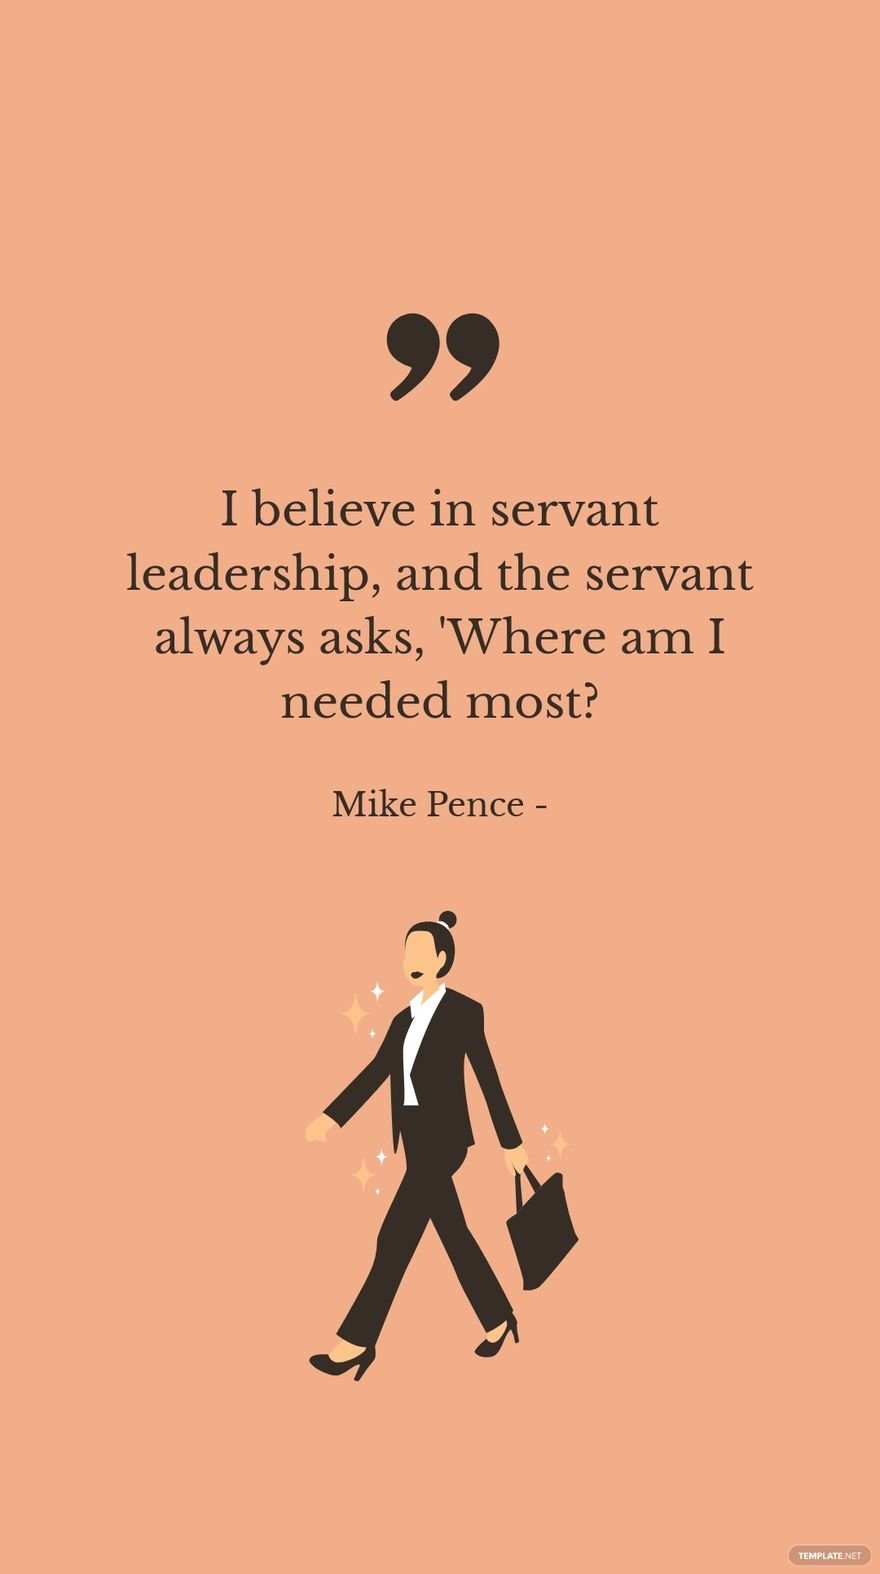 Mike Pence - I believe in servant leadership, and the servant always asks, 'Where am I needed most? in JPG